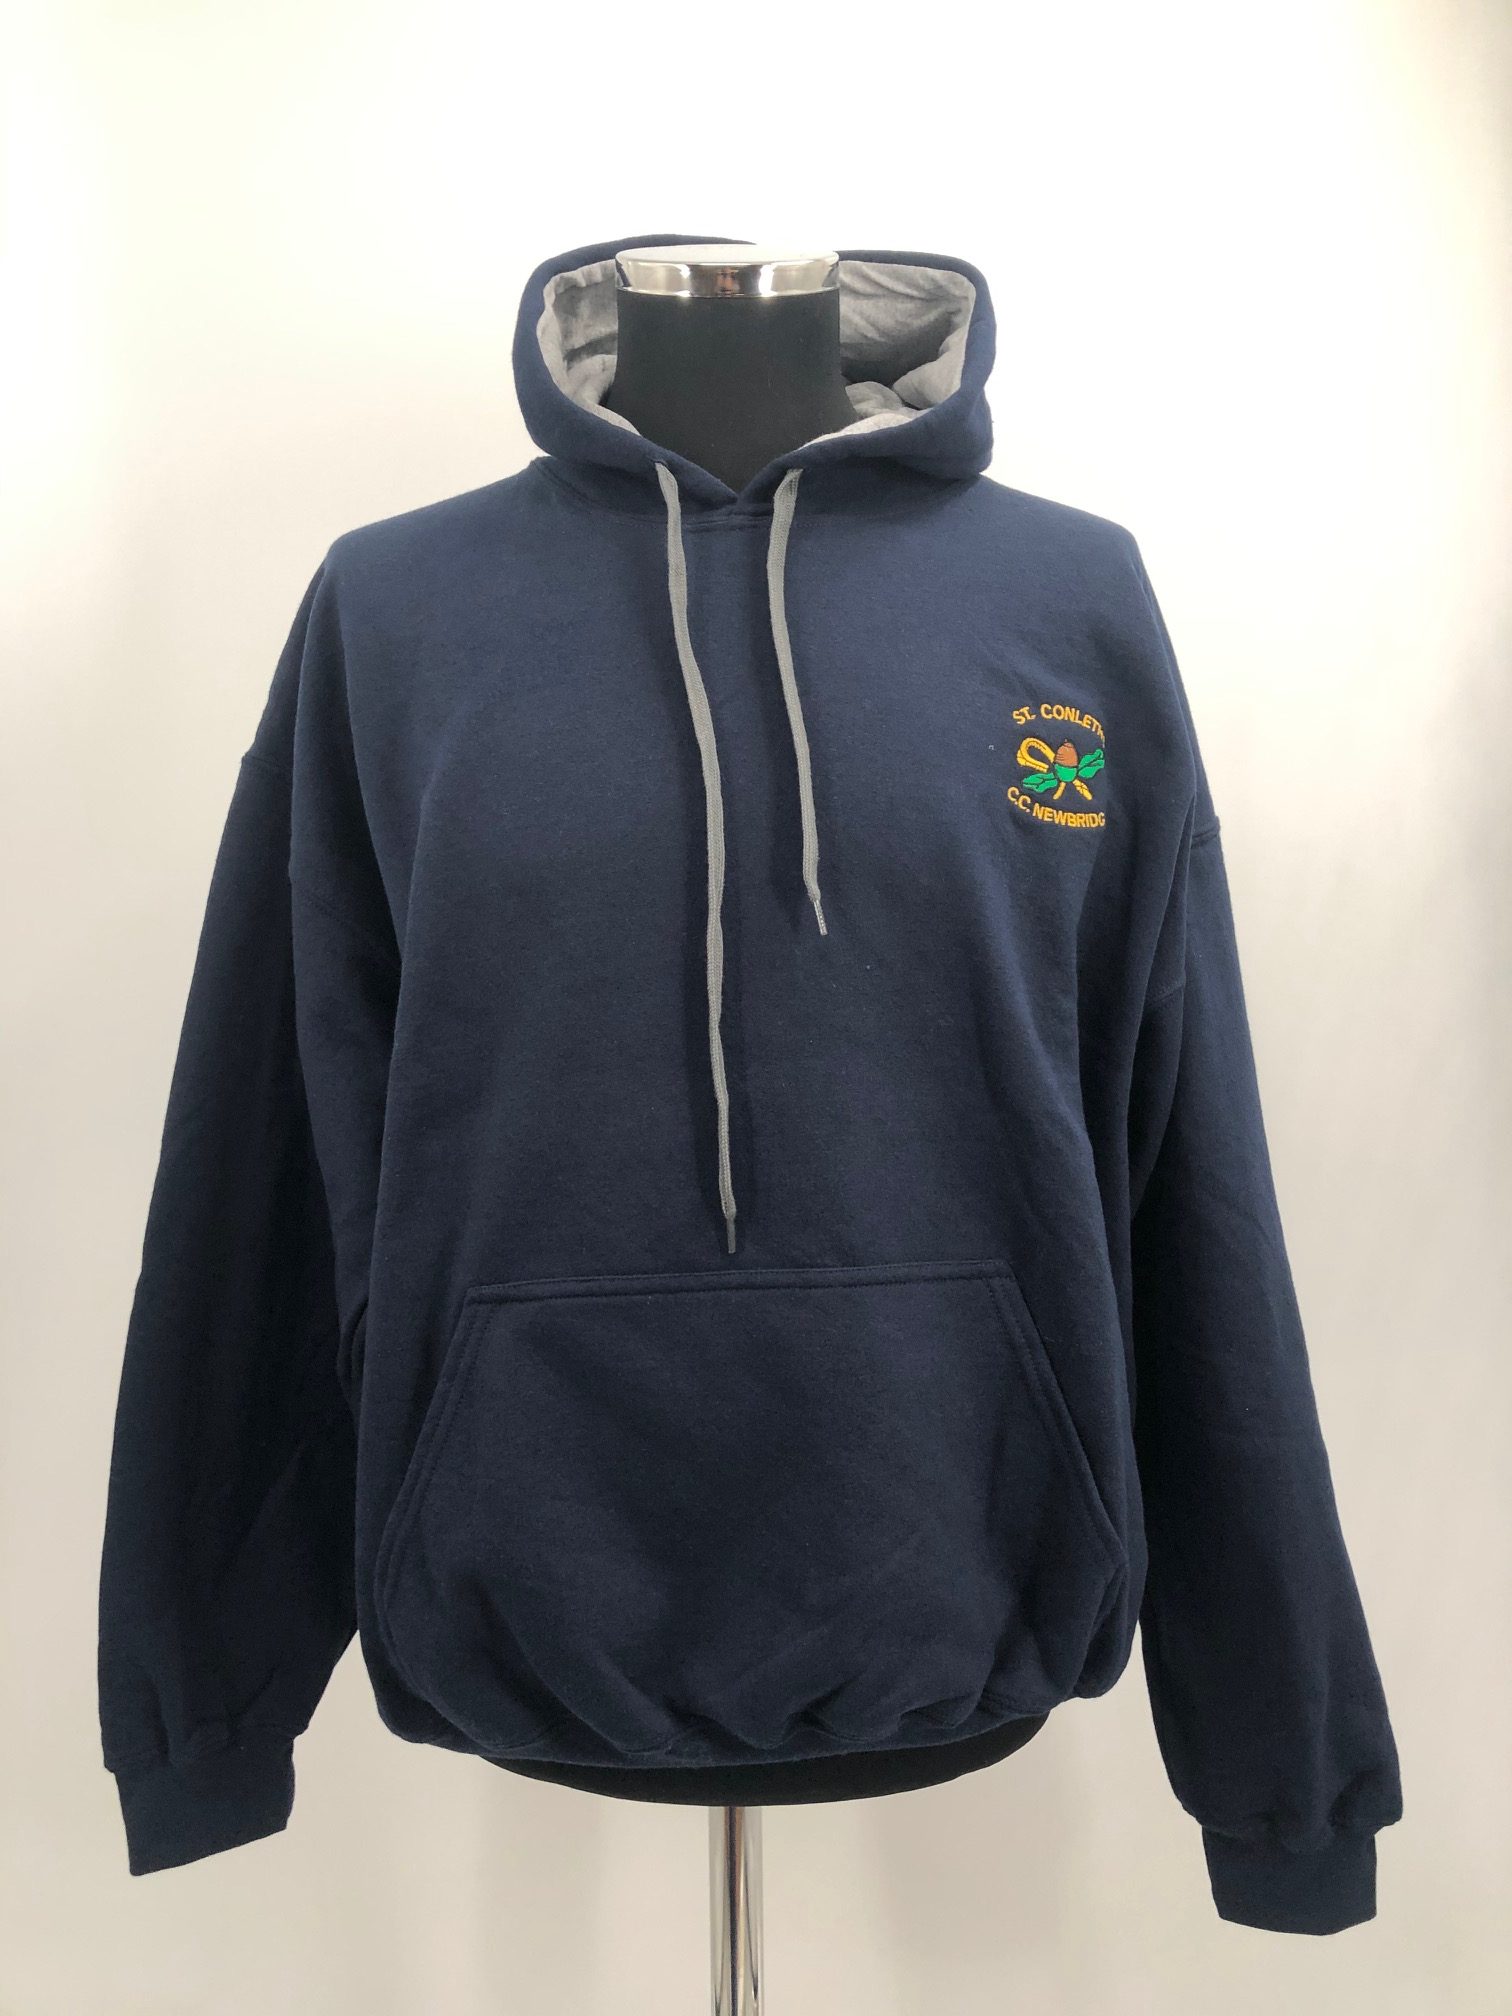 St. Conleth's Community College Hoodie - The Back to School Store